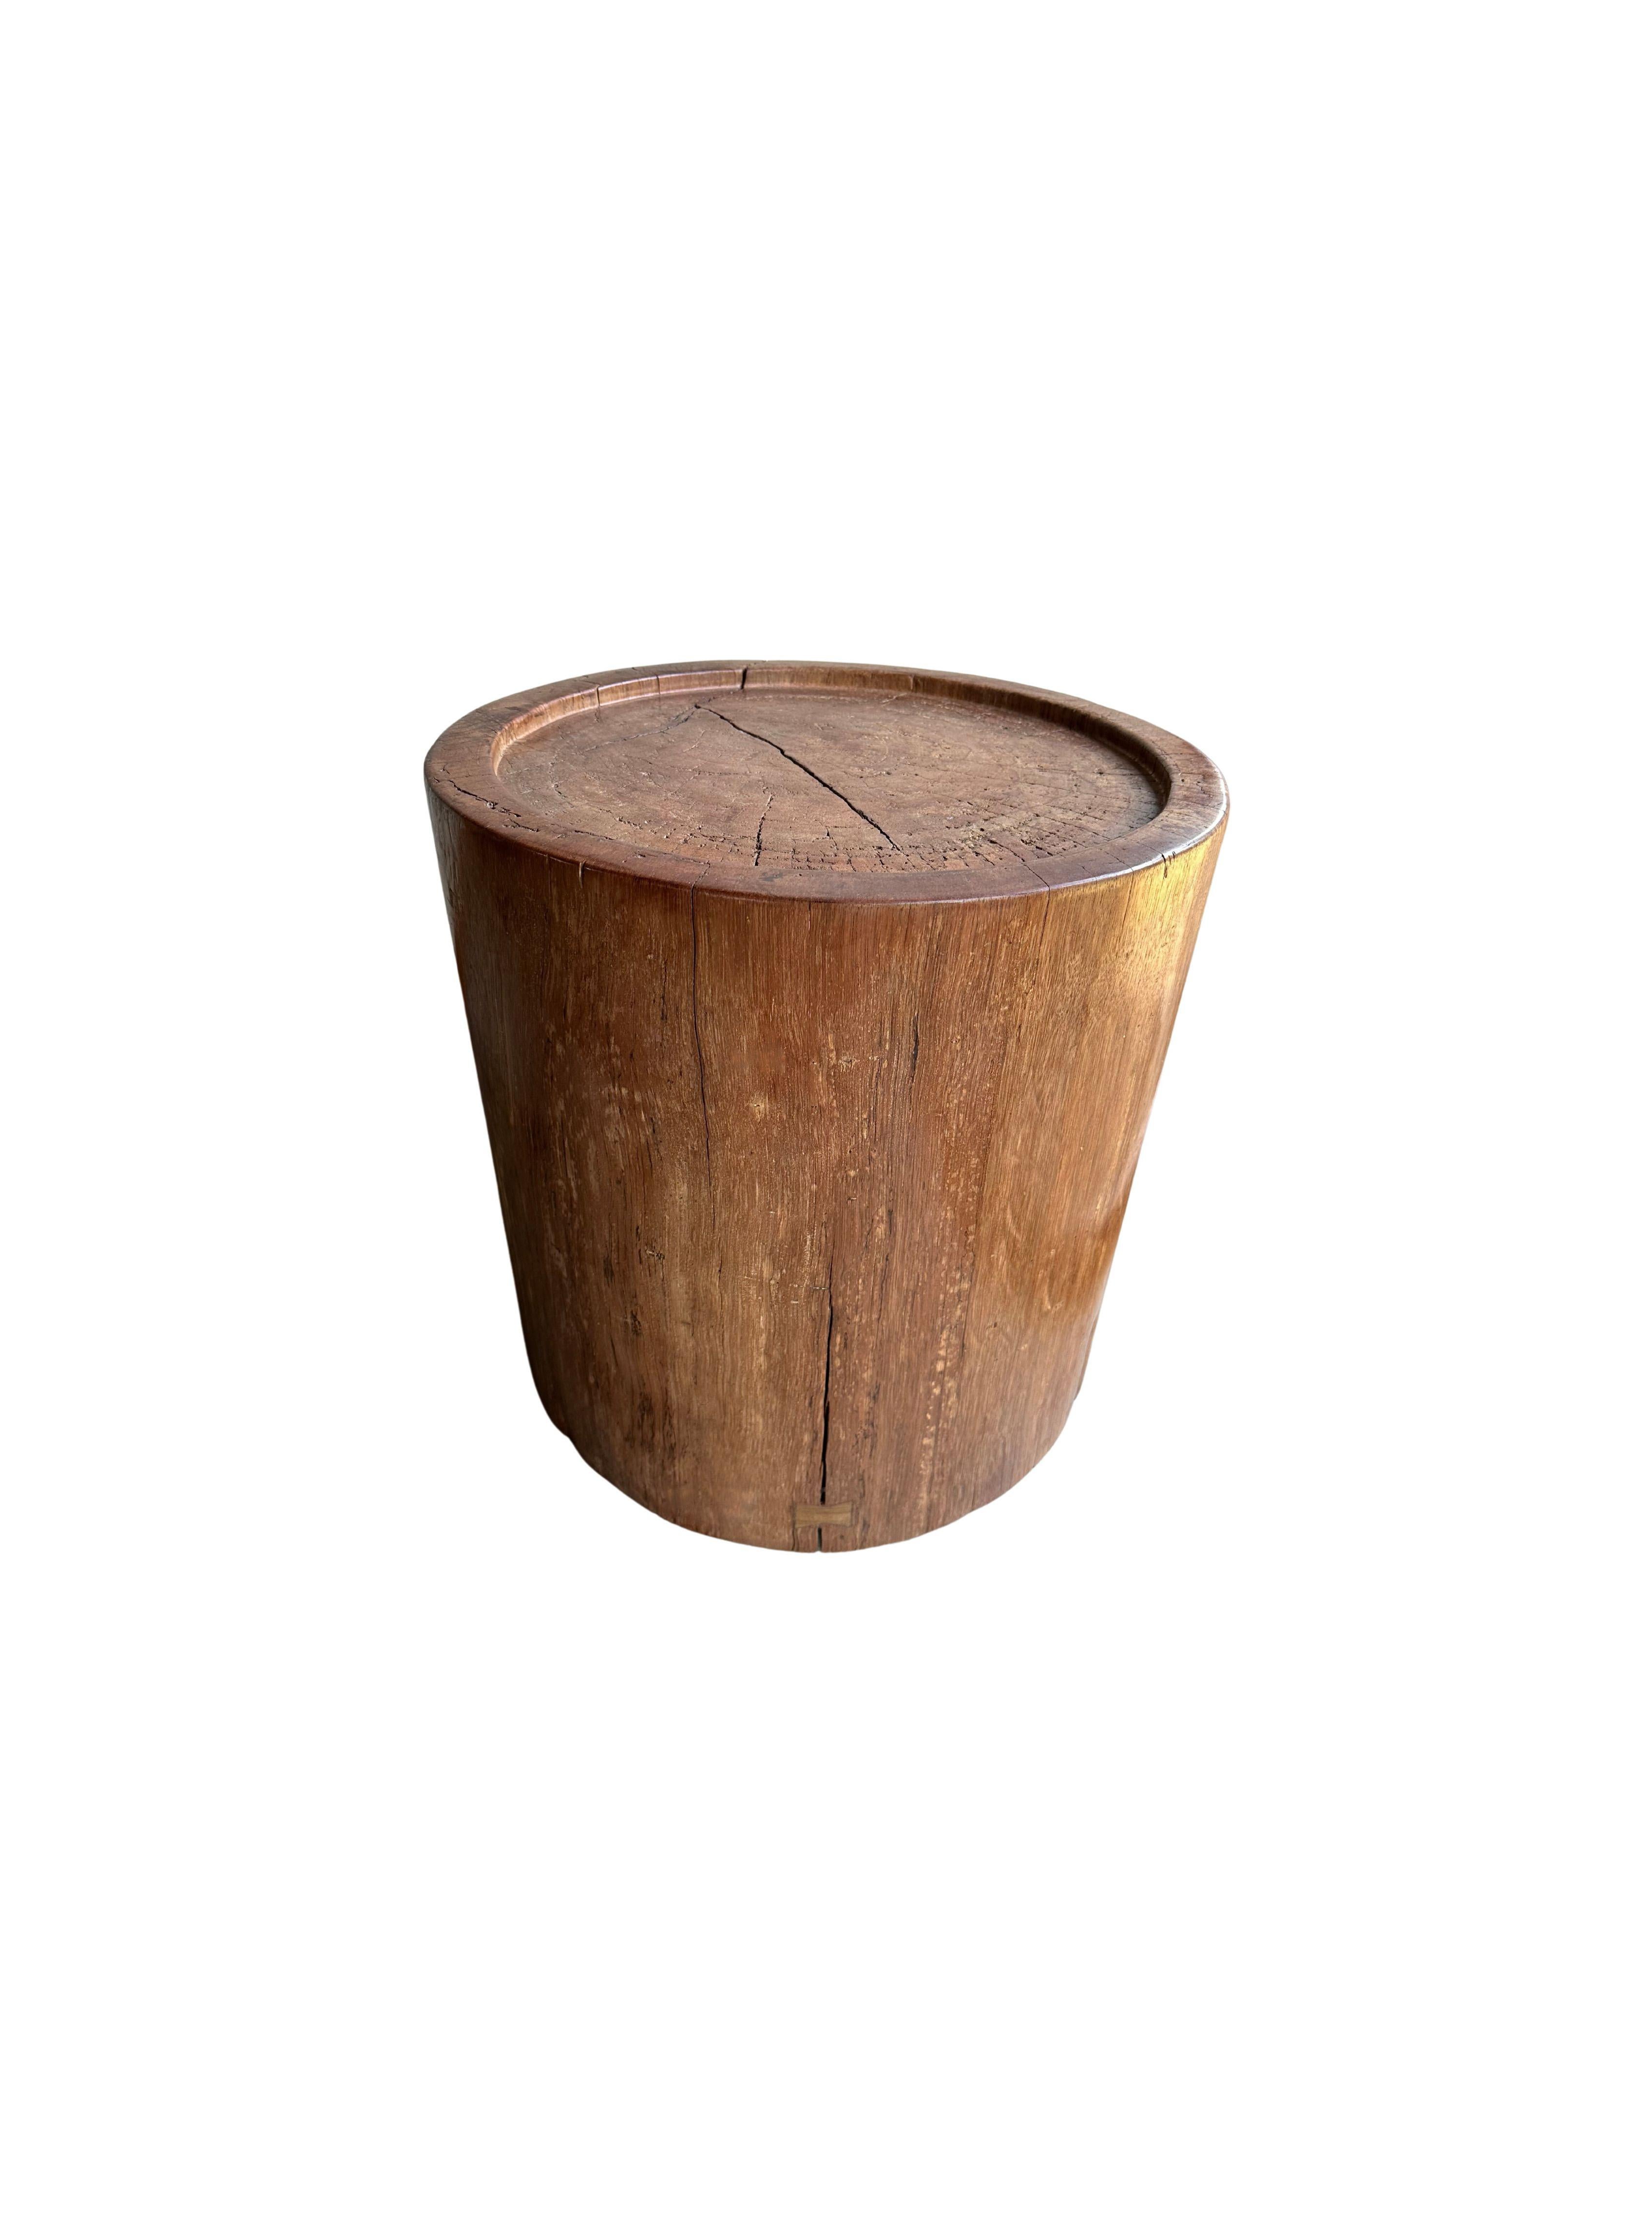 Sculptural Meranti Wood Side Table, with Stunning Wood Textures, Modern Organic For Sale 3